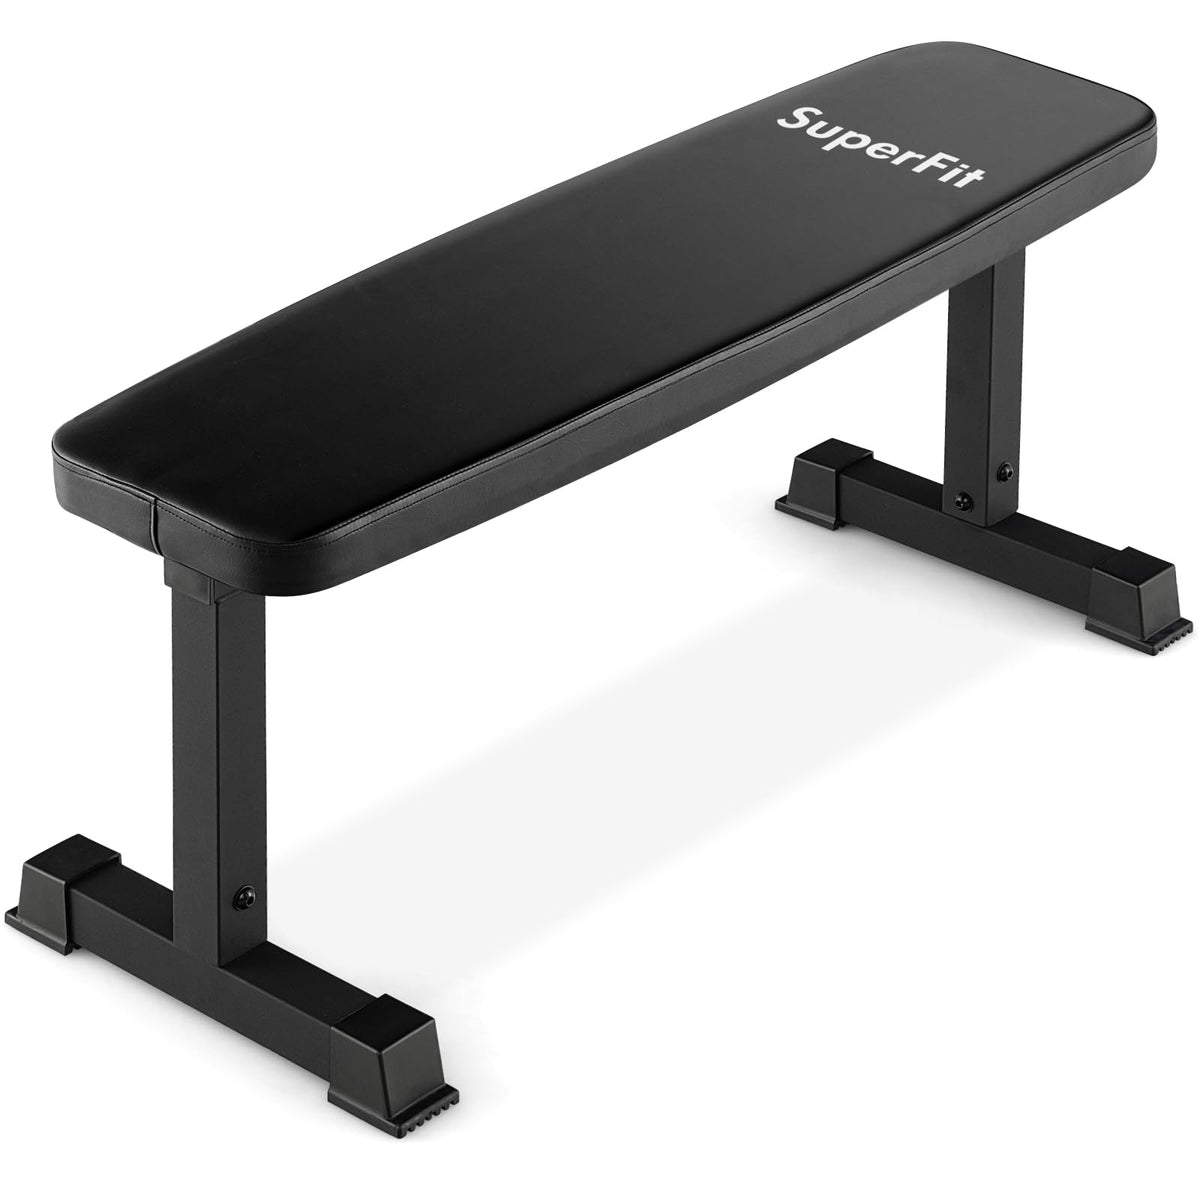 Goplus Flat Weight Bench, 660 LBS Heavy Duty Strength Training Exercise Bench